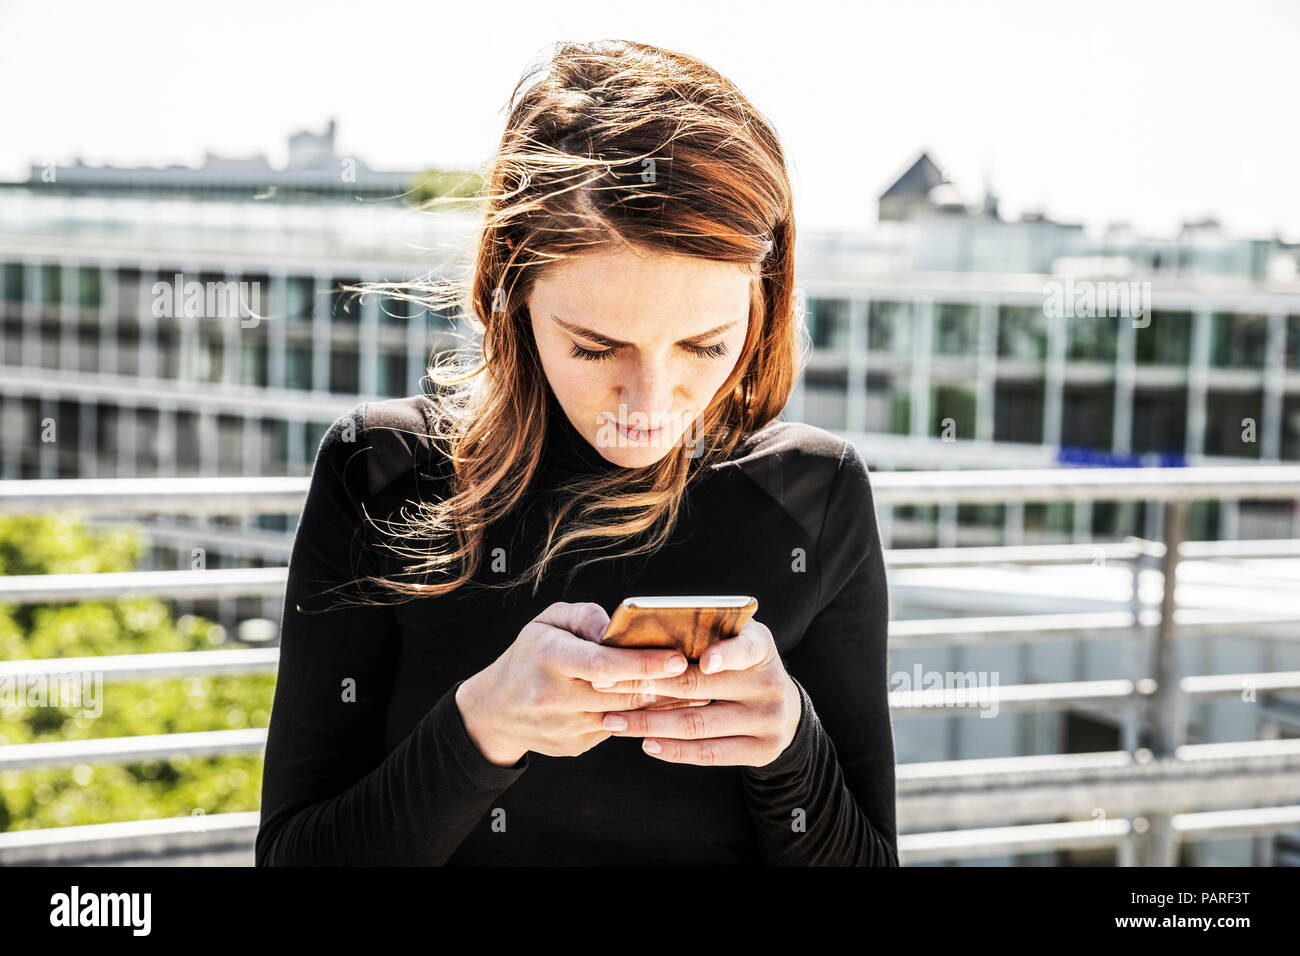 Woman text messaging on roof terrace Stock Photo